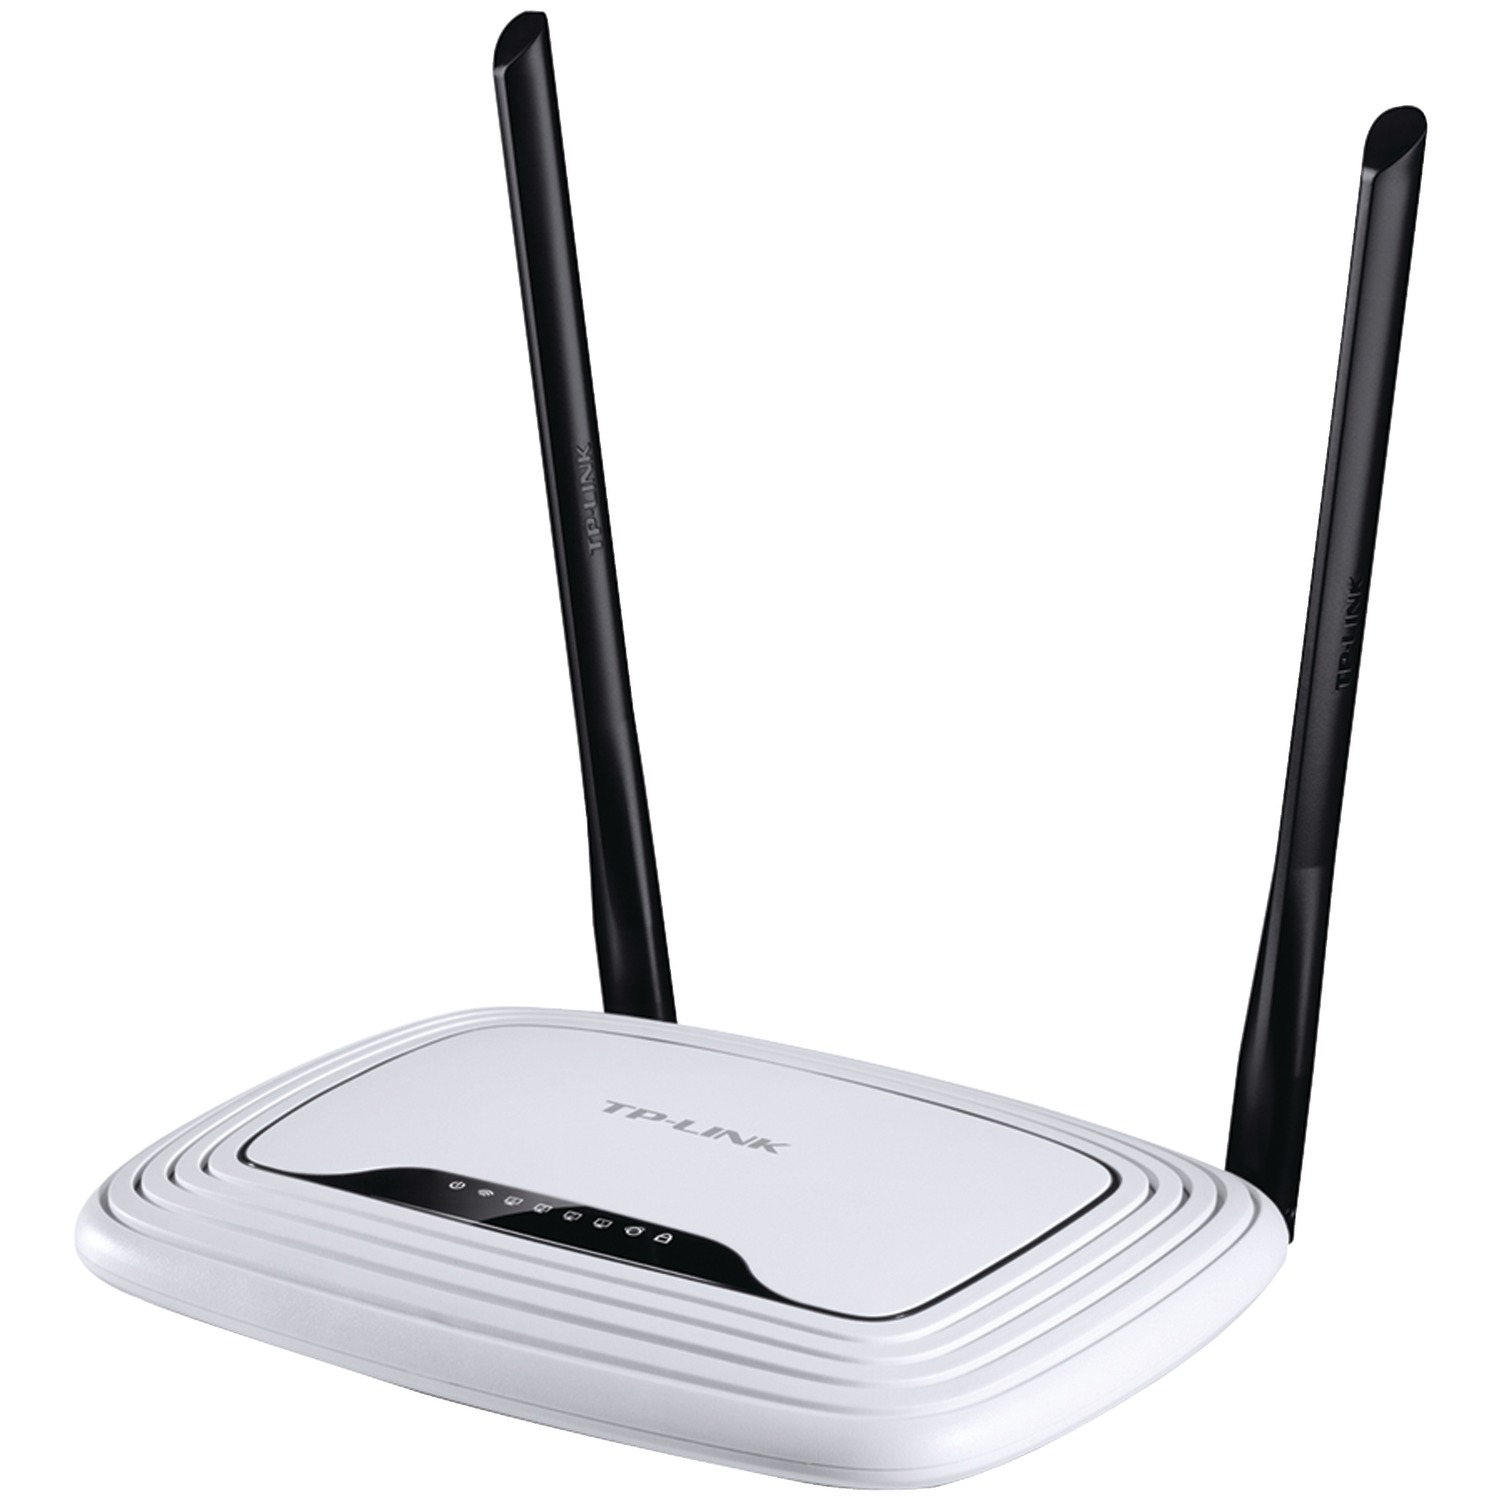 TP-Link TL-WR841N 300mbps Wireless N Router - image 1 of 4